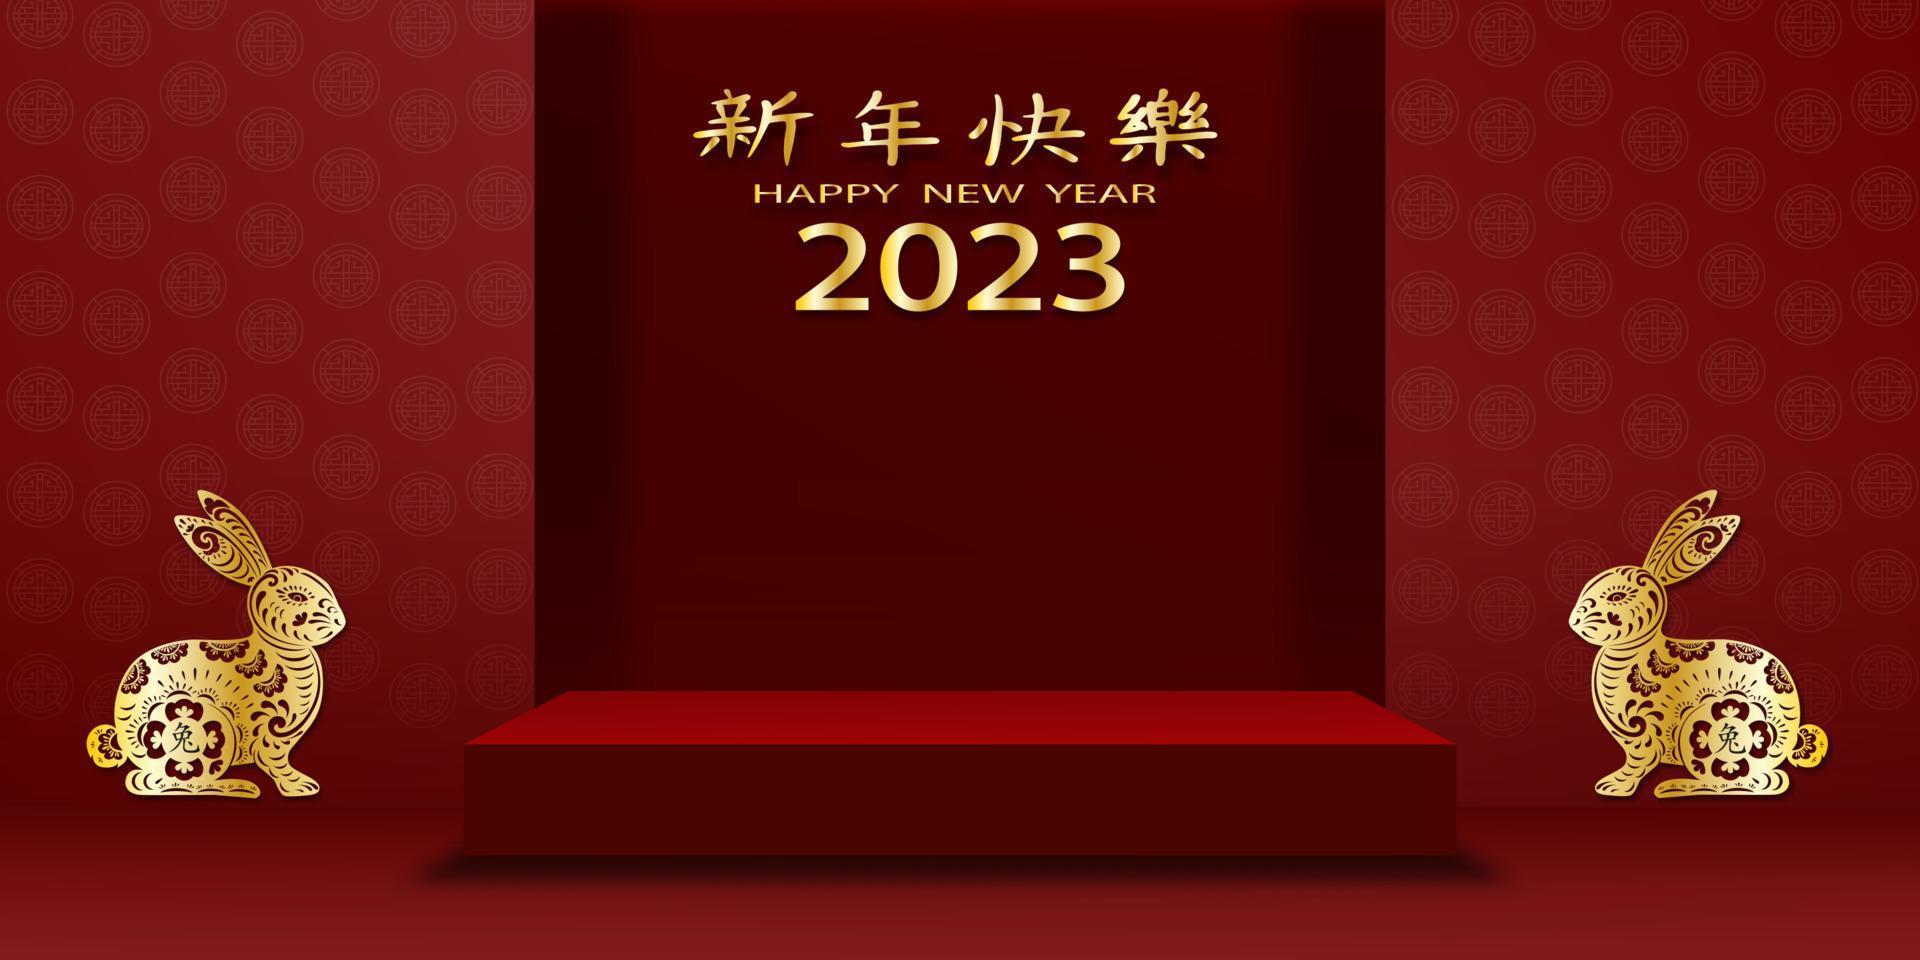 Happy Chinese New Year 2023, Year of the Rabbit Zodiac Sign,Studio room 3D Podium with Golden Rabbit paper cut with flower elements lantern on red wall background,Translation Happy new year vector